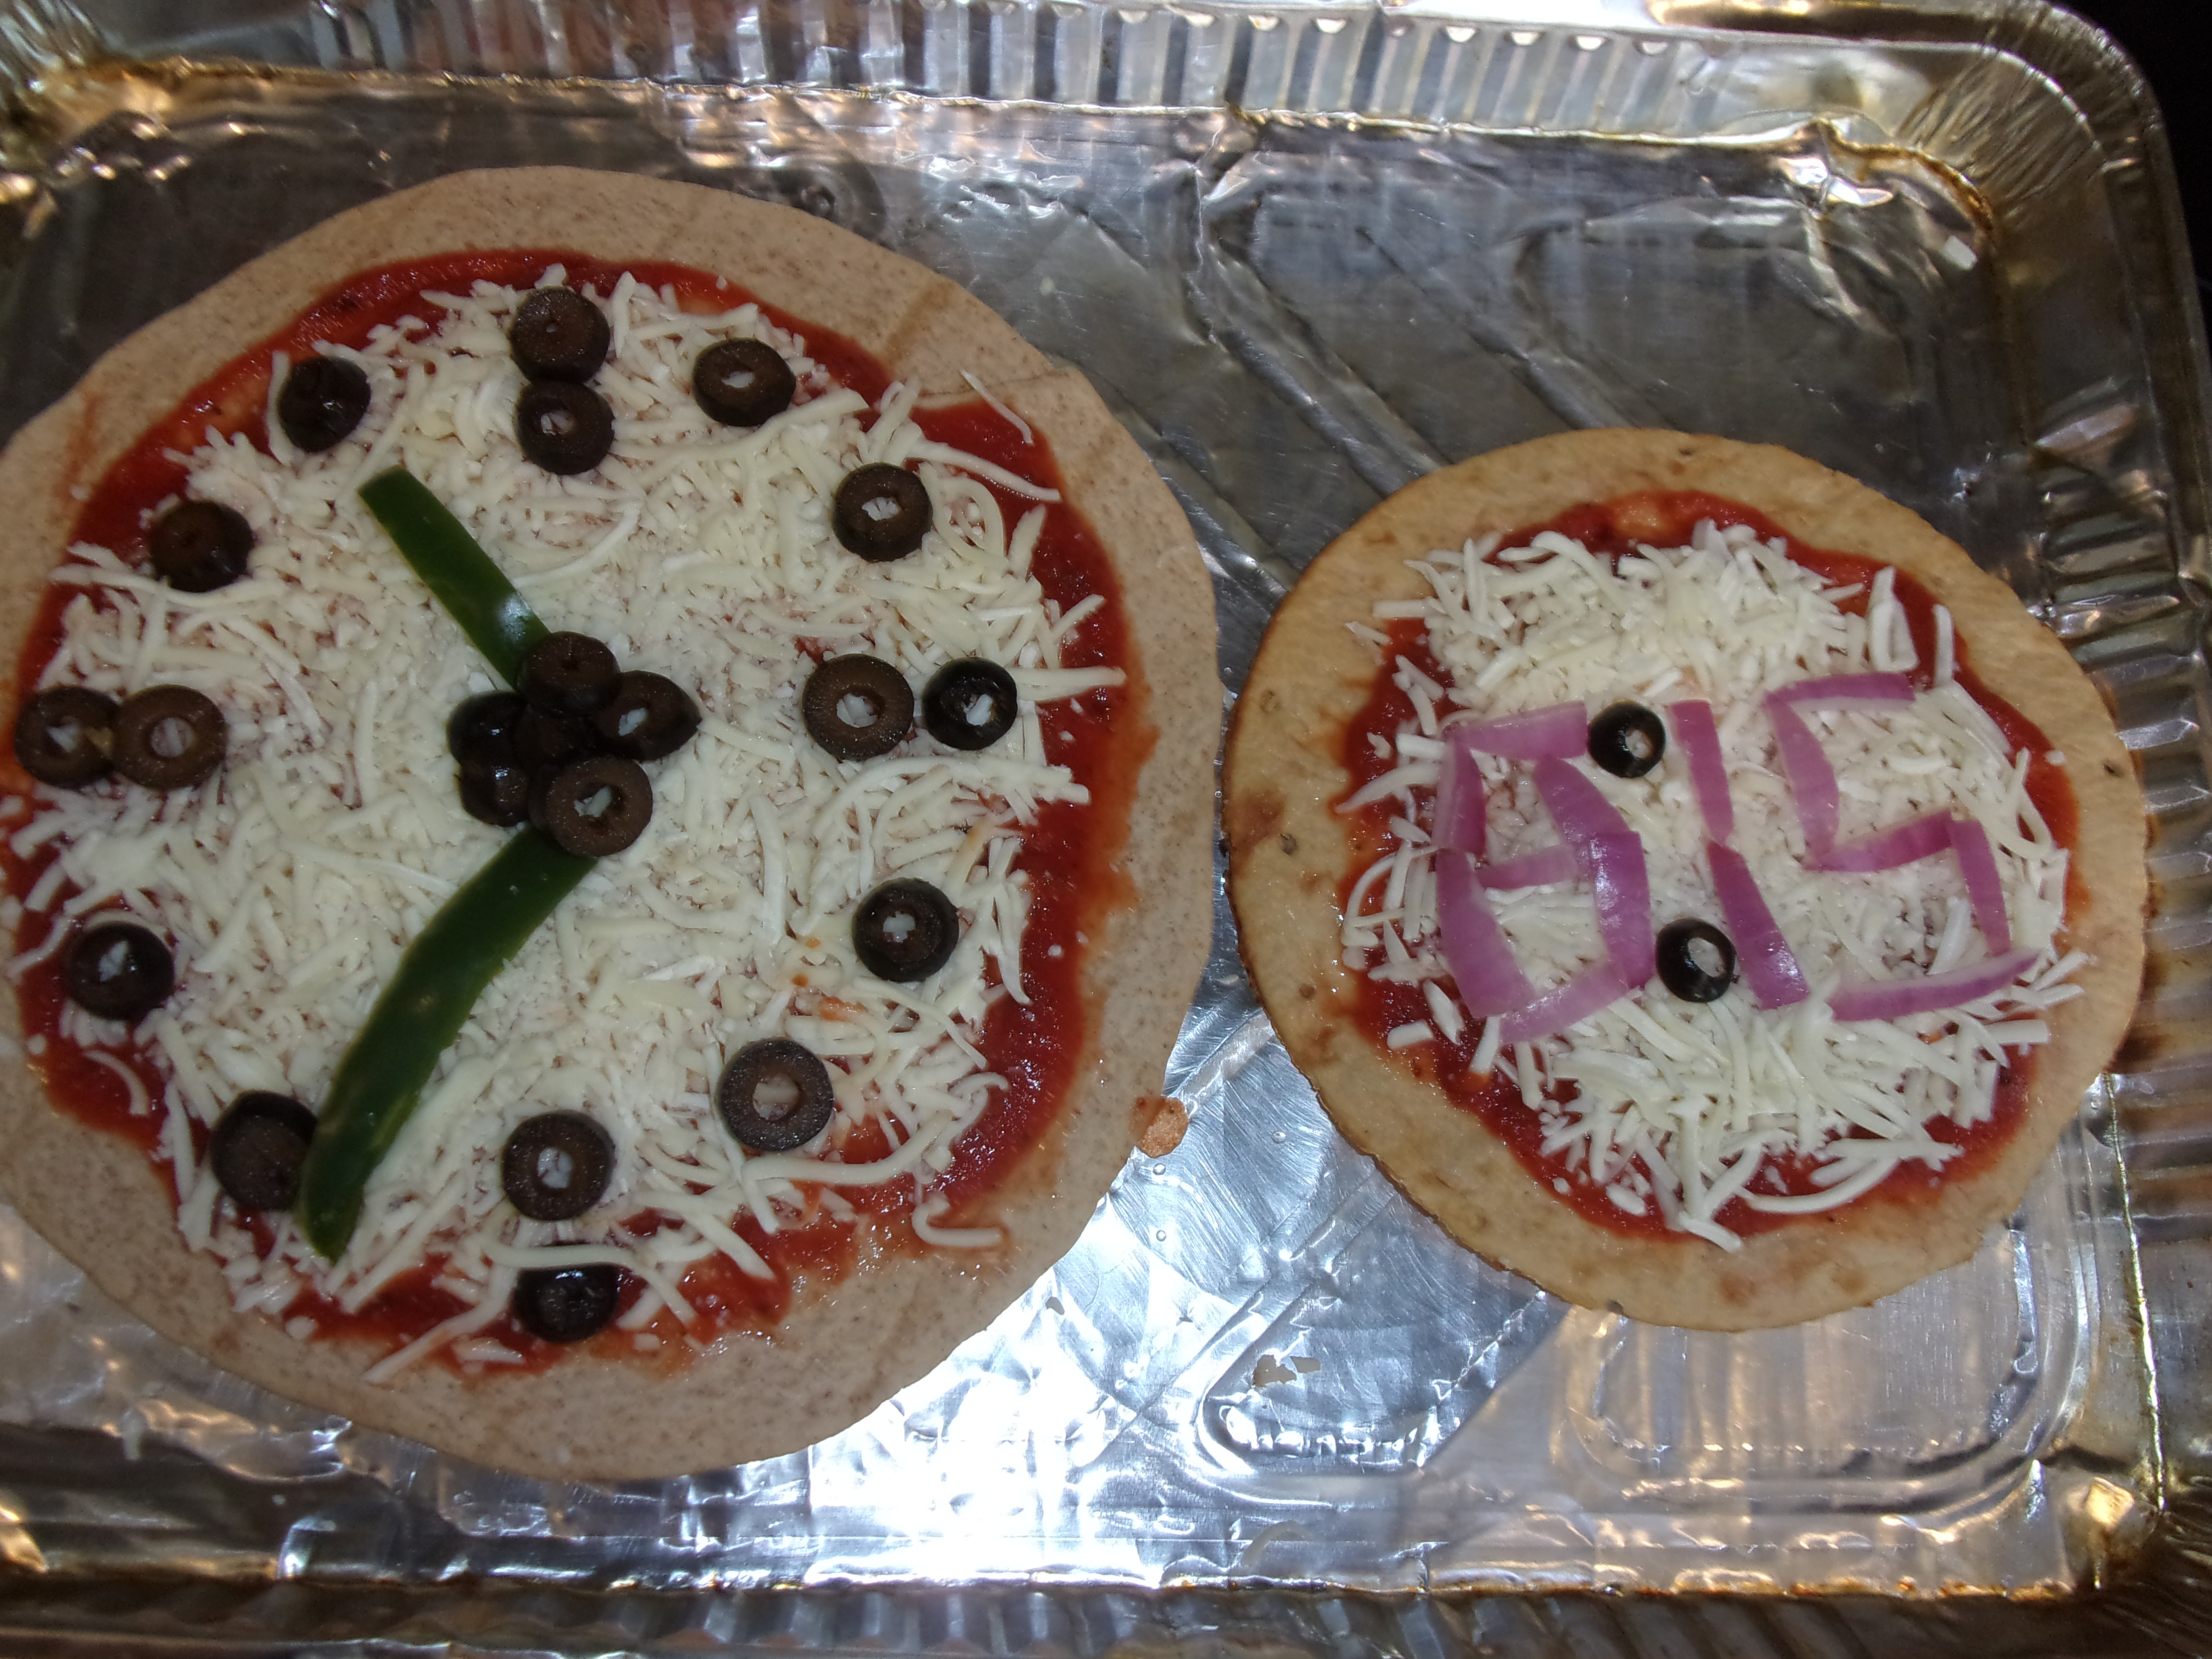 two pizzas with toppings placed to look like clocks. one is analog, using peppers to make the time approximately 11:35; the other is "digital" using onions to write out "8:15"